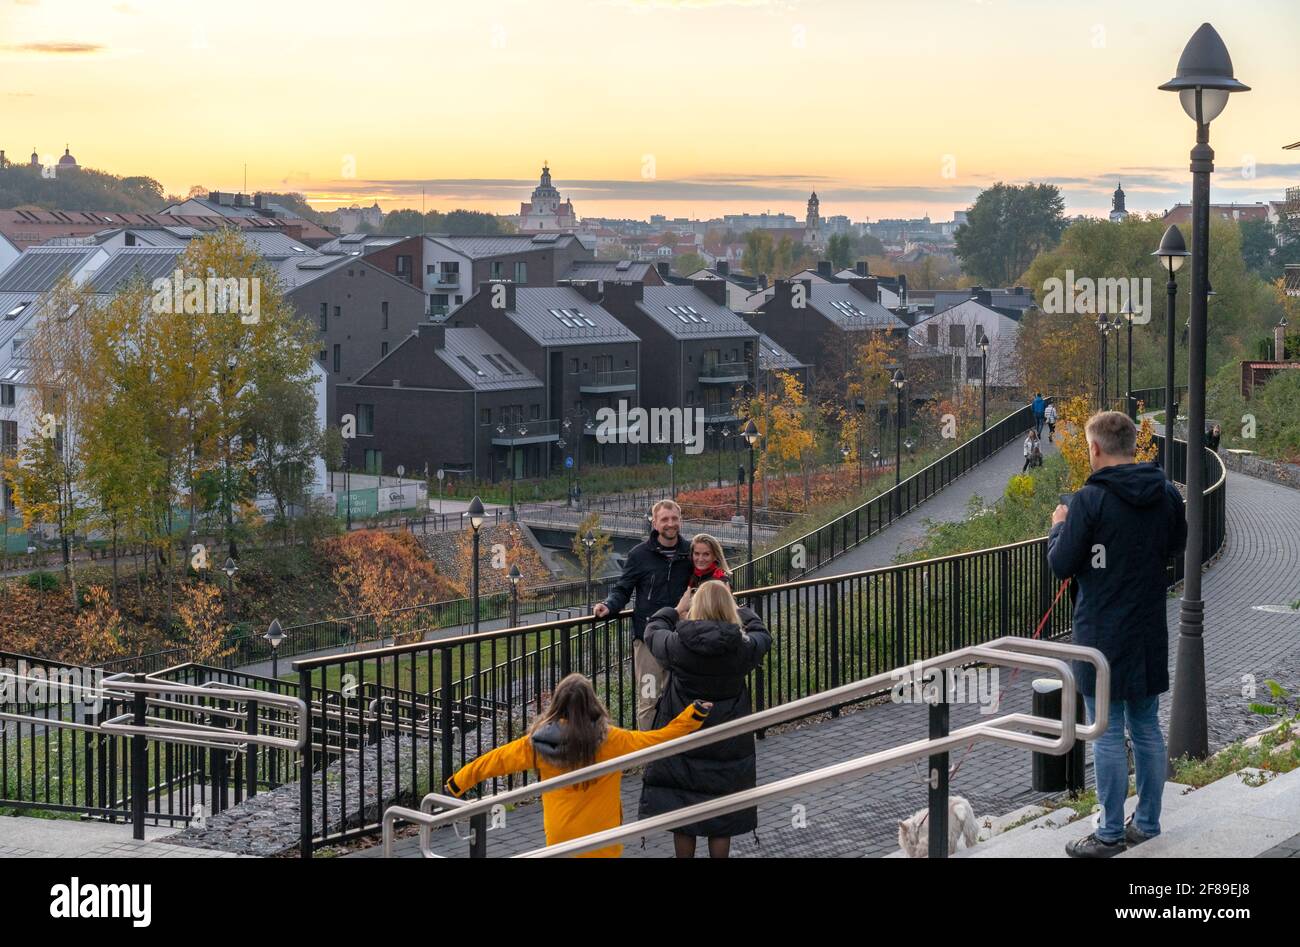 Vilnius, Lithuania - October 24, 2020: The leisure time of the city residents and guests at sunset in the renovated old part of Vilnius - Paupys Stock Photo